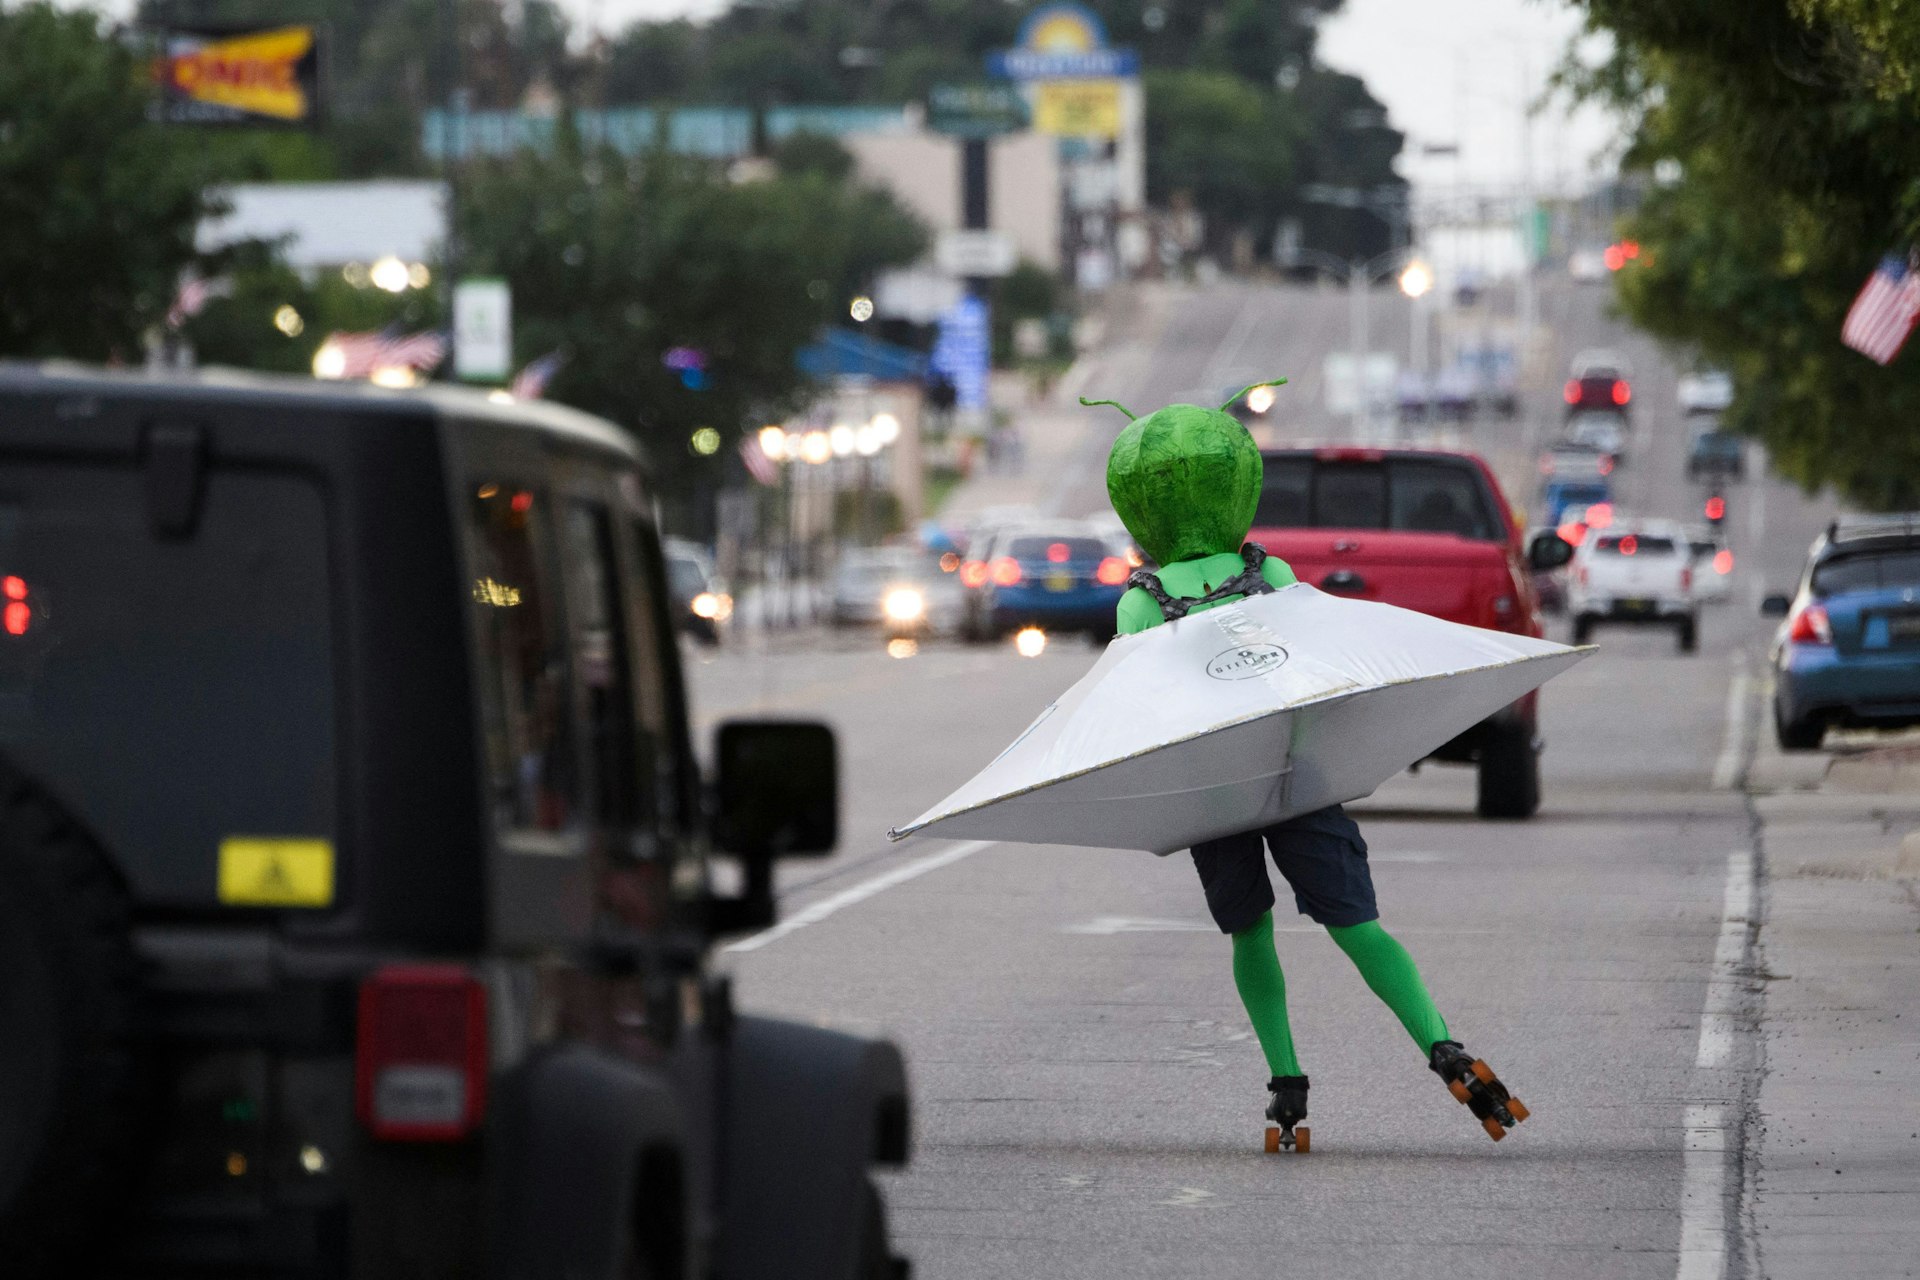 A person wearing an alien costume in a flying saucer roller skates through traffic down Main Street during the UFO Festival on July 2, 2021 in Roswell, New Mexico